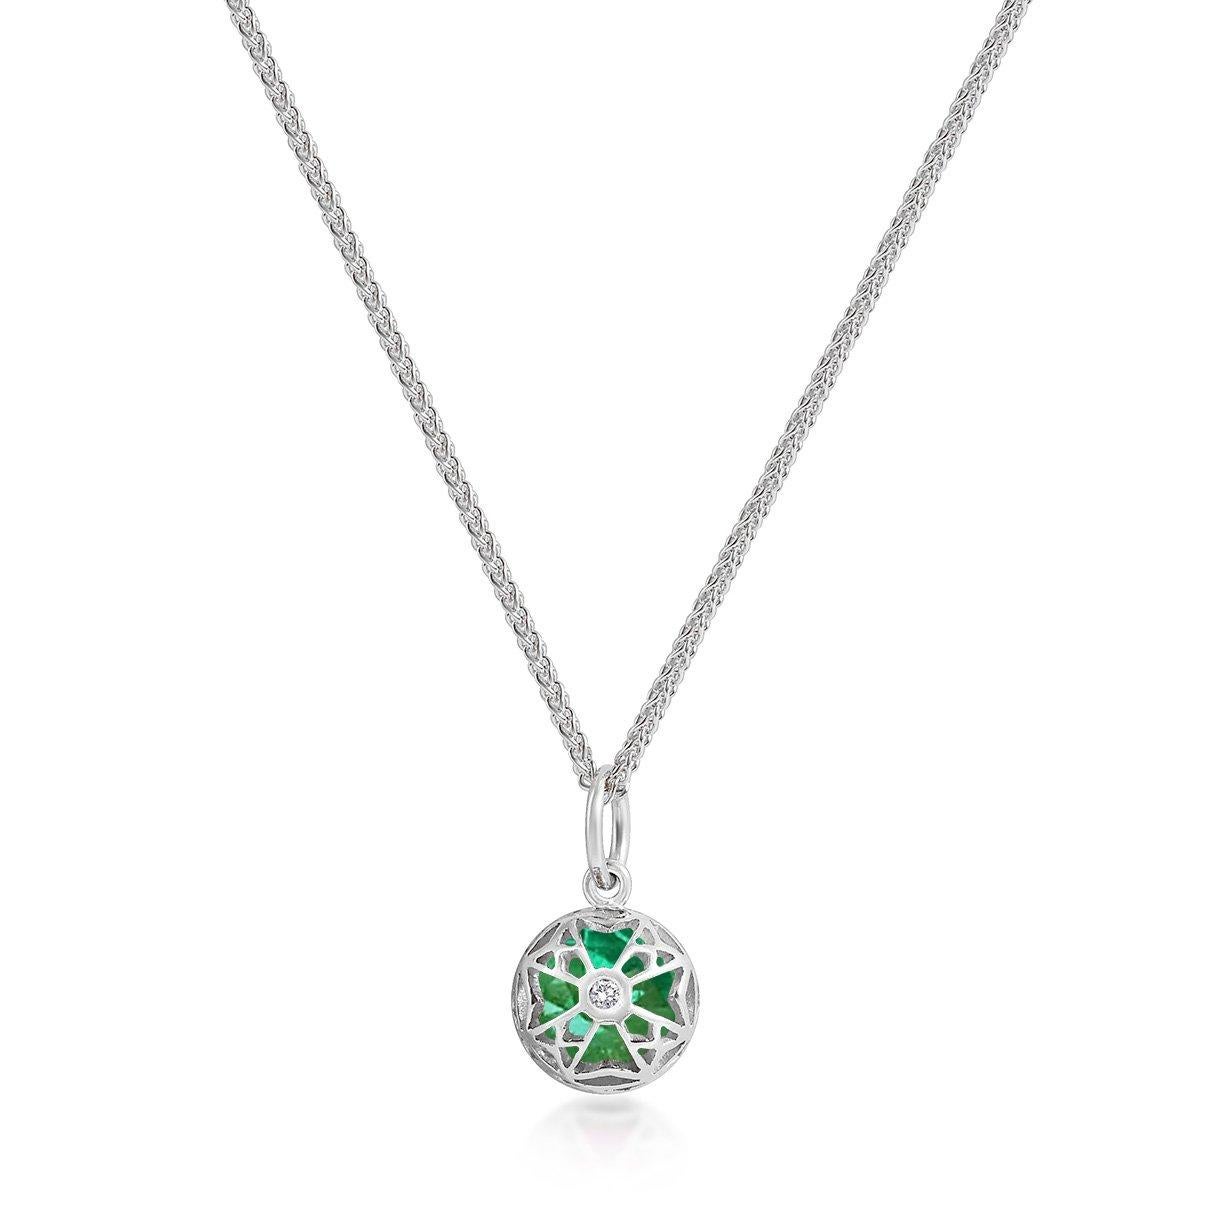 Handcrafted 1.00 Carat Emerald 18 Karat White Gold Pendant Necklace. The 7mm natural stone is set in our iconic hand pierced gold lace to let the light through. Our pendants are the ideal gift. 

Here presented on our finely knitted gold chains.